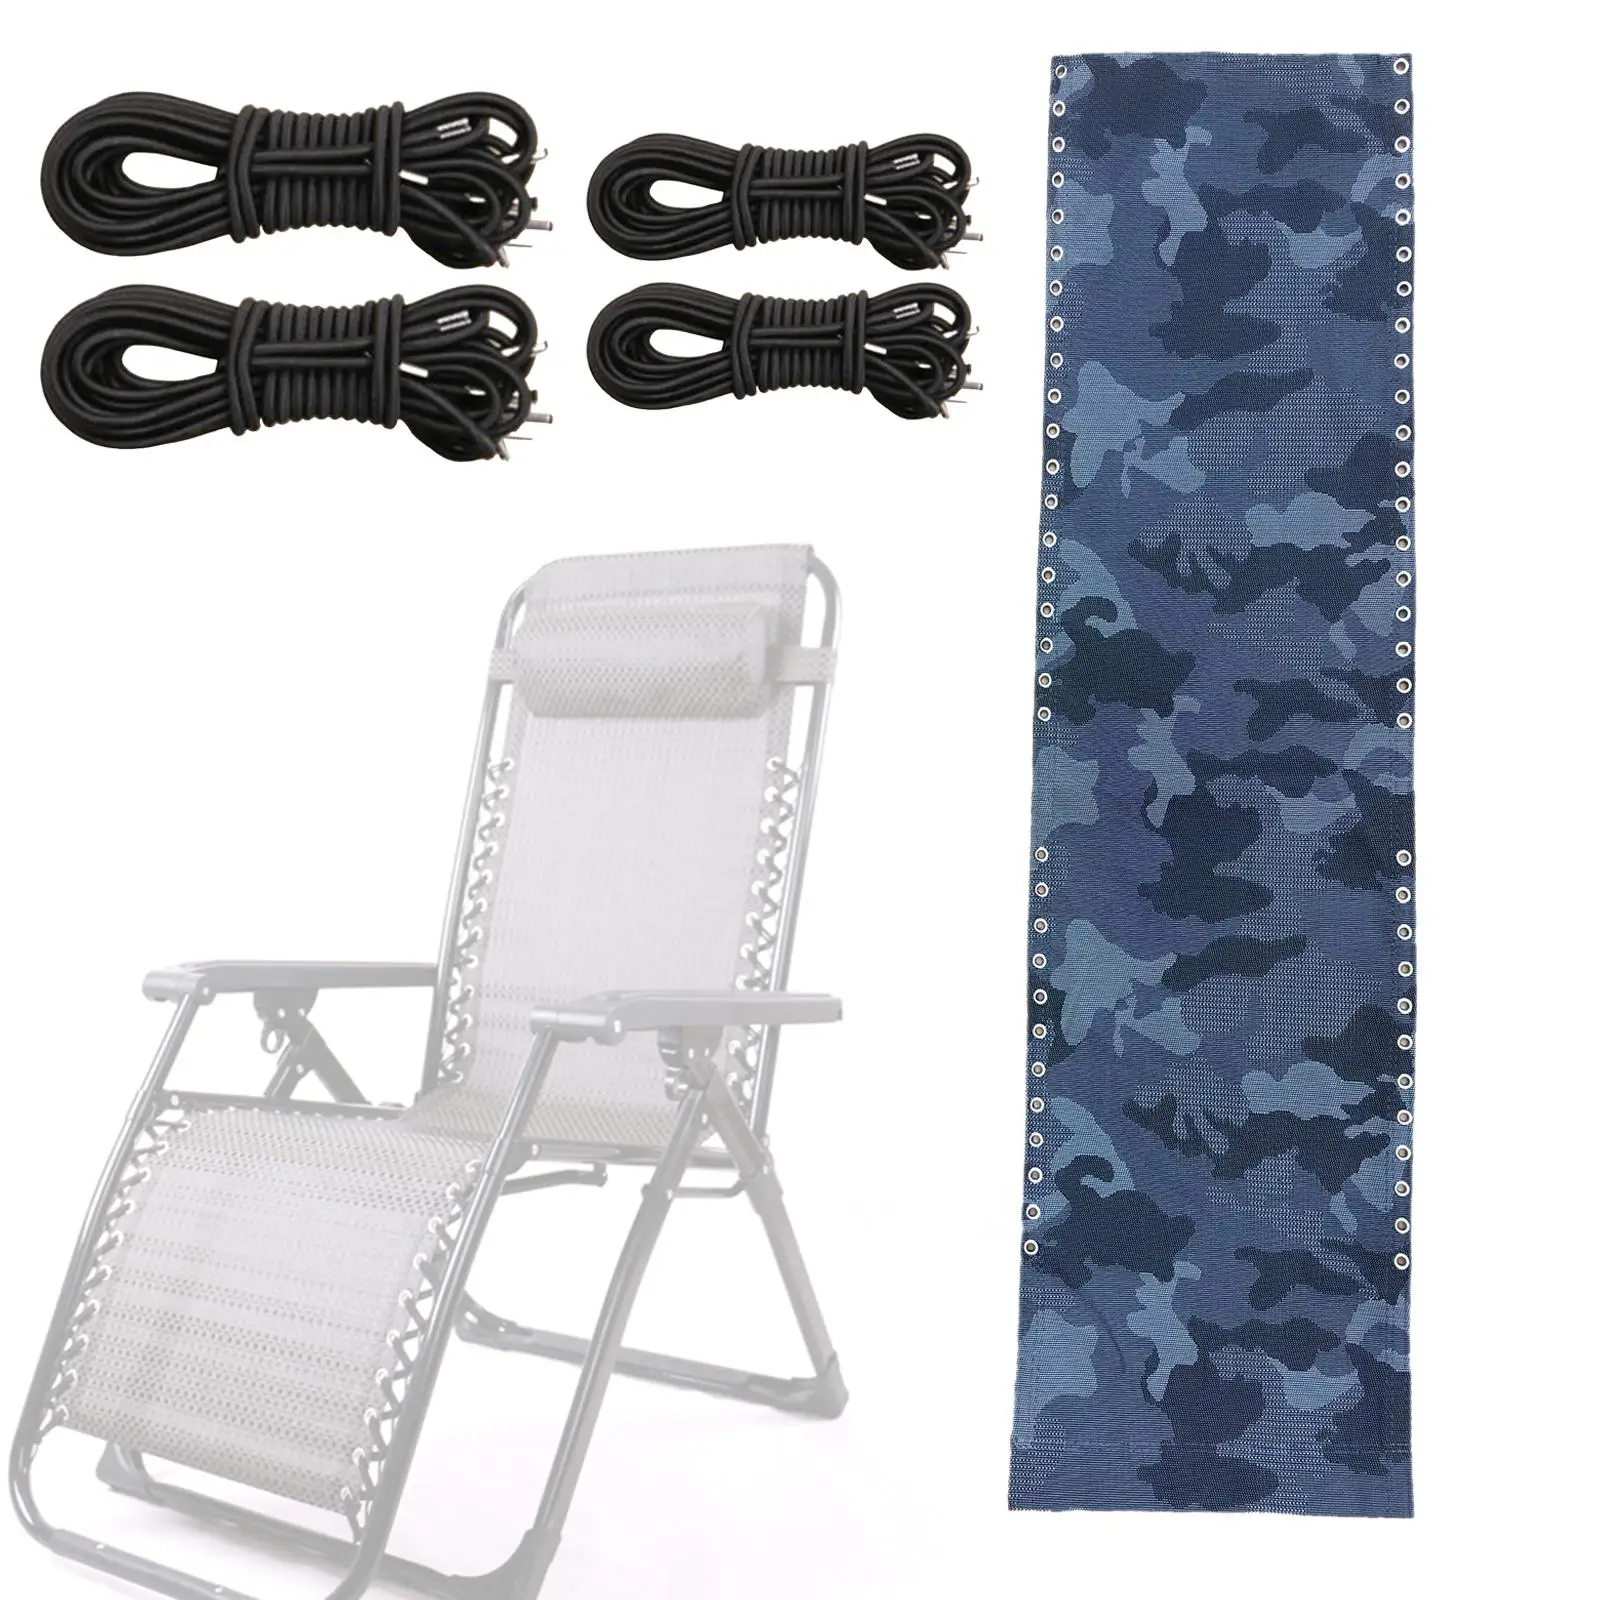 Universal recliner Replacement Fabric with Ropes Waterproof Tool Breathable Reclining Cloth for Lounge Beach Patio Intdoor Lawn